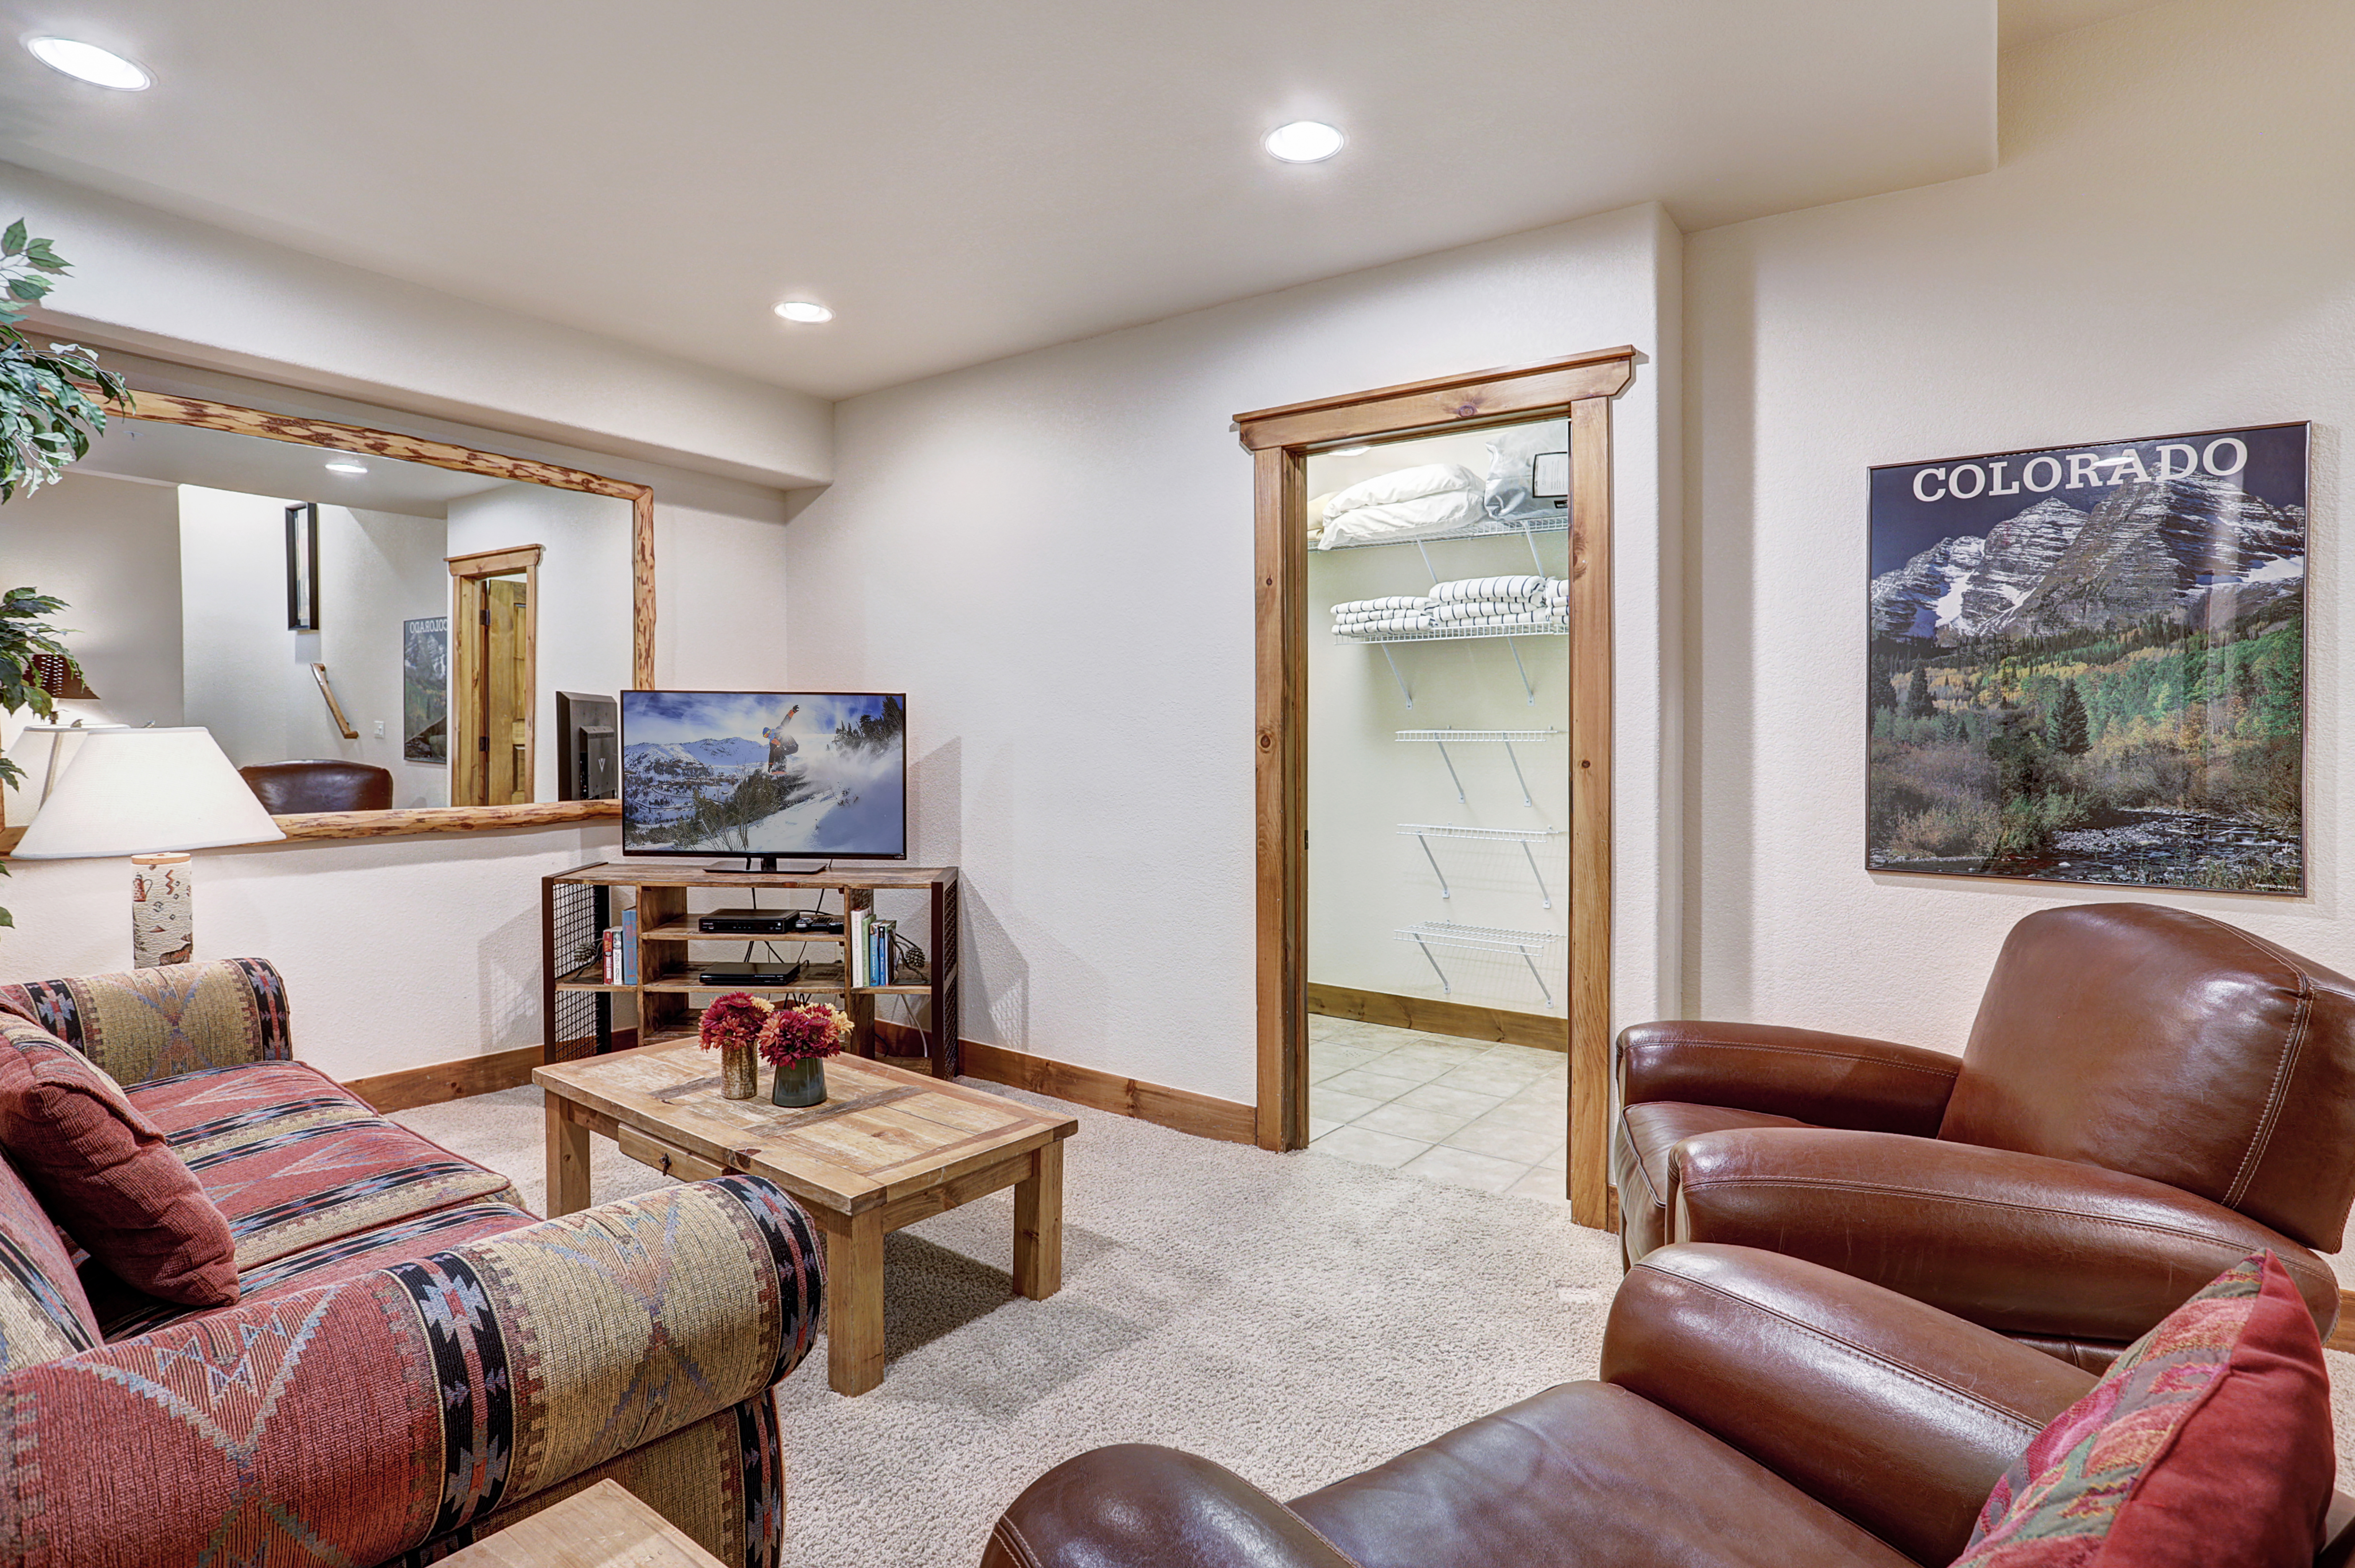 Watch a movie with friends and family in this lower level living space - Amber Sky Breckenridge Vacation Rental